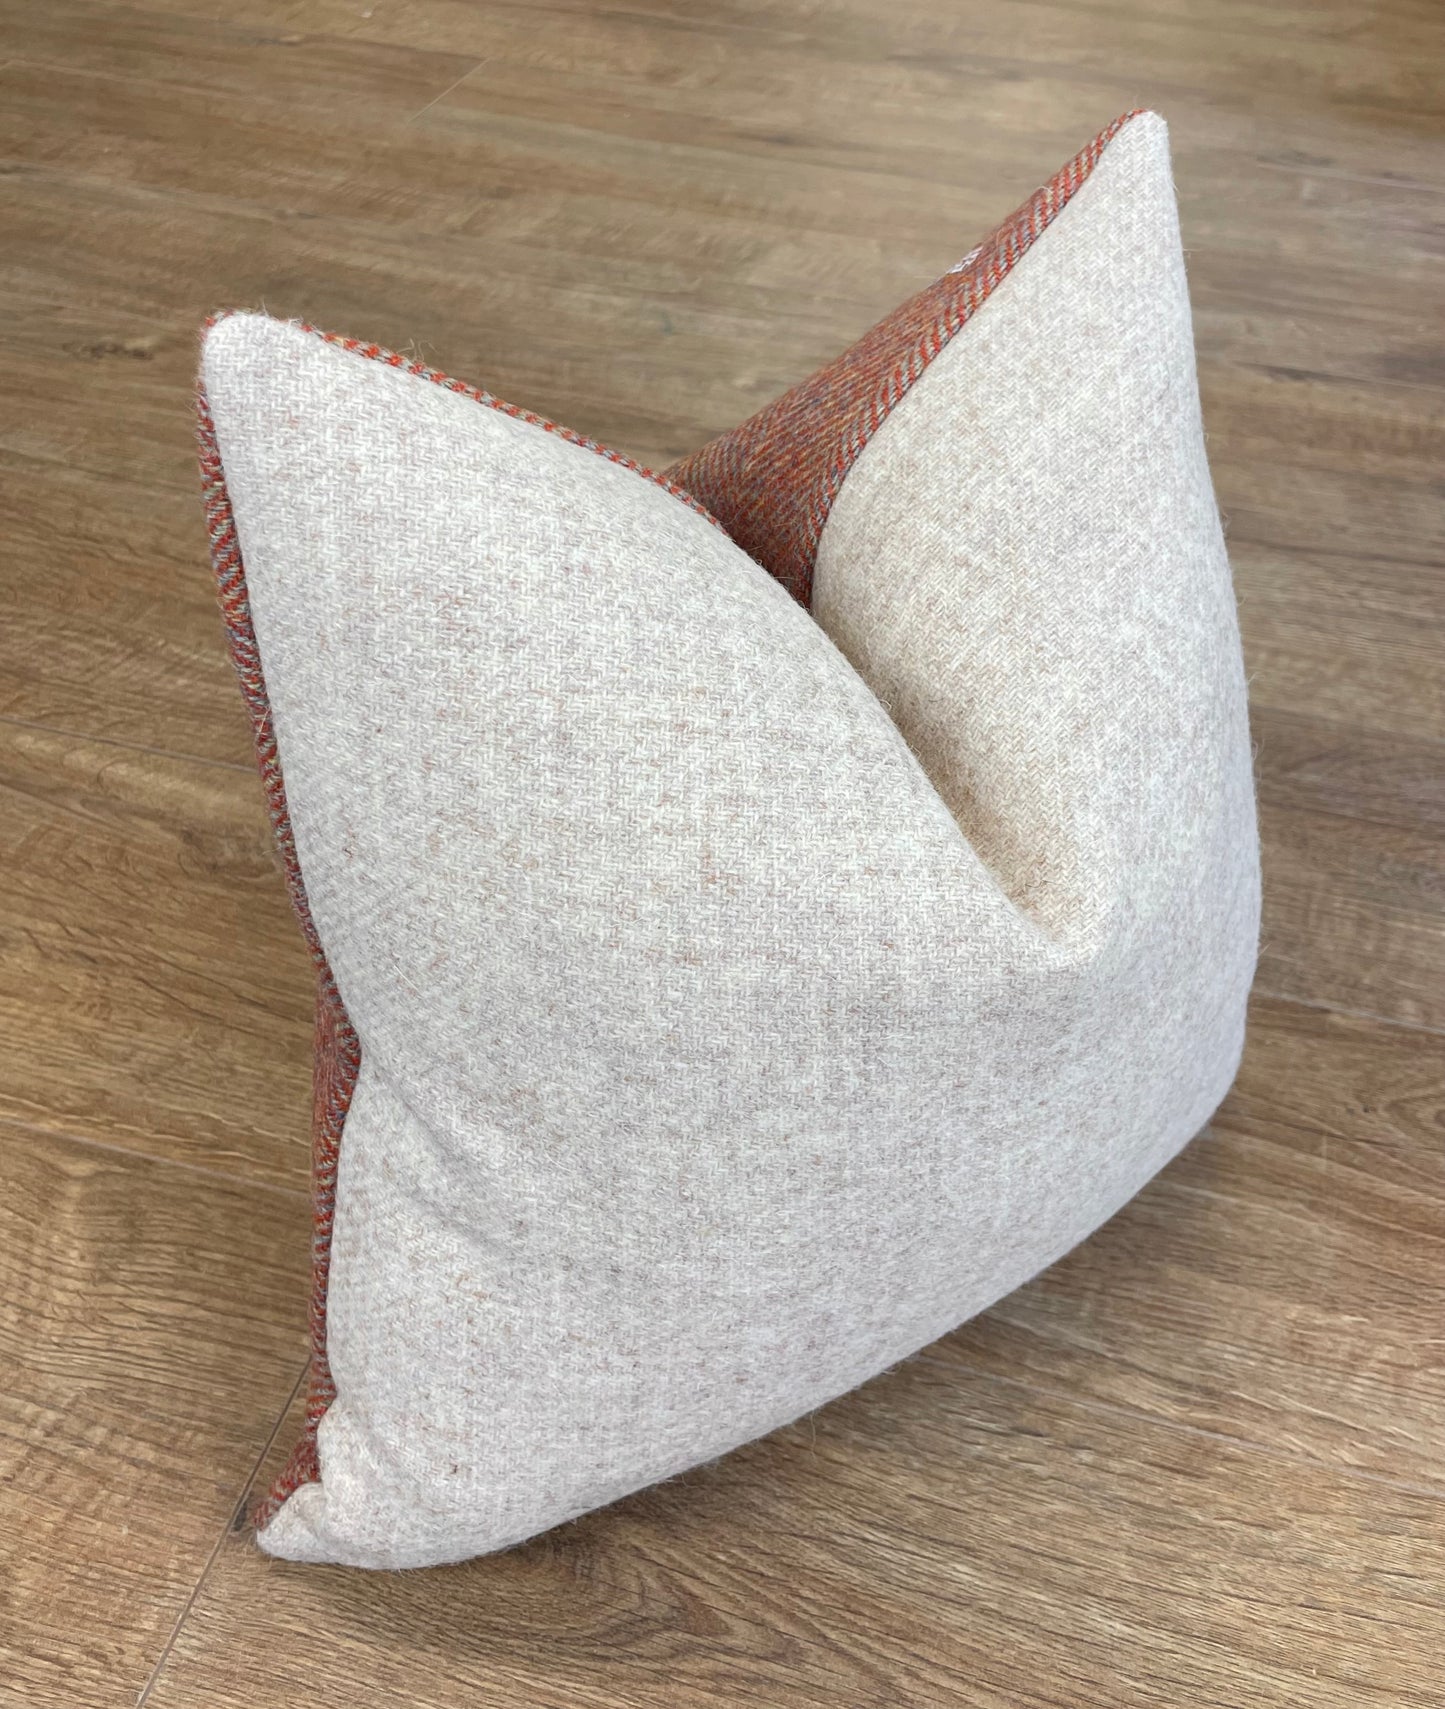 Special Edition Harris Tweed Rust and Oatmeal Orb Cushion - 16"